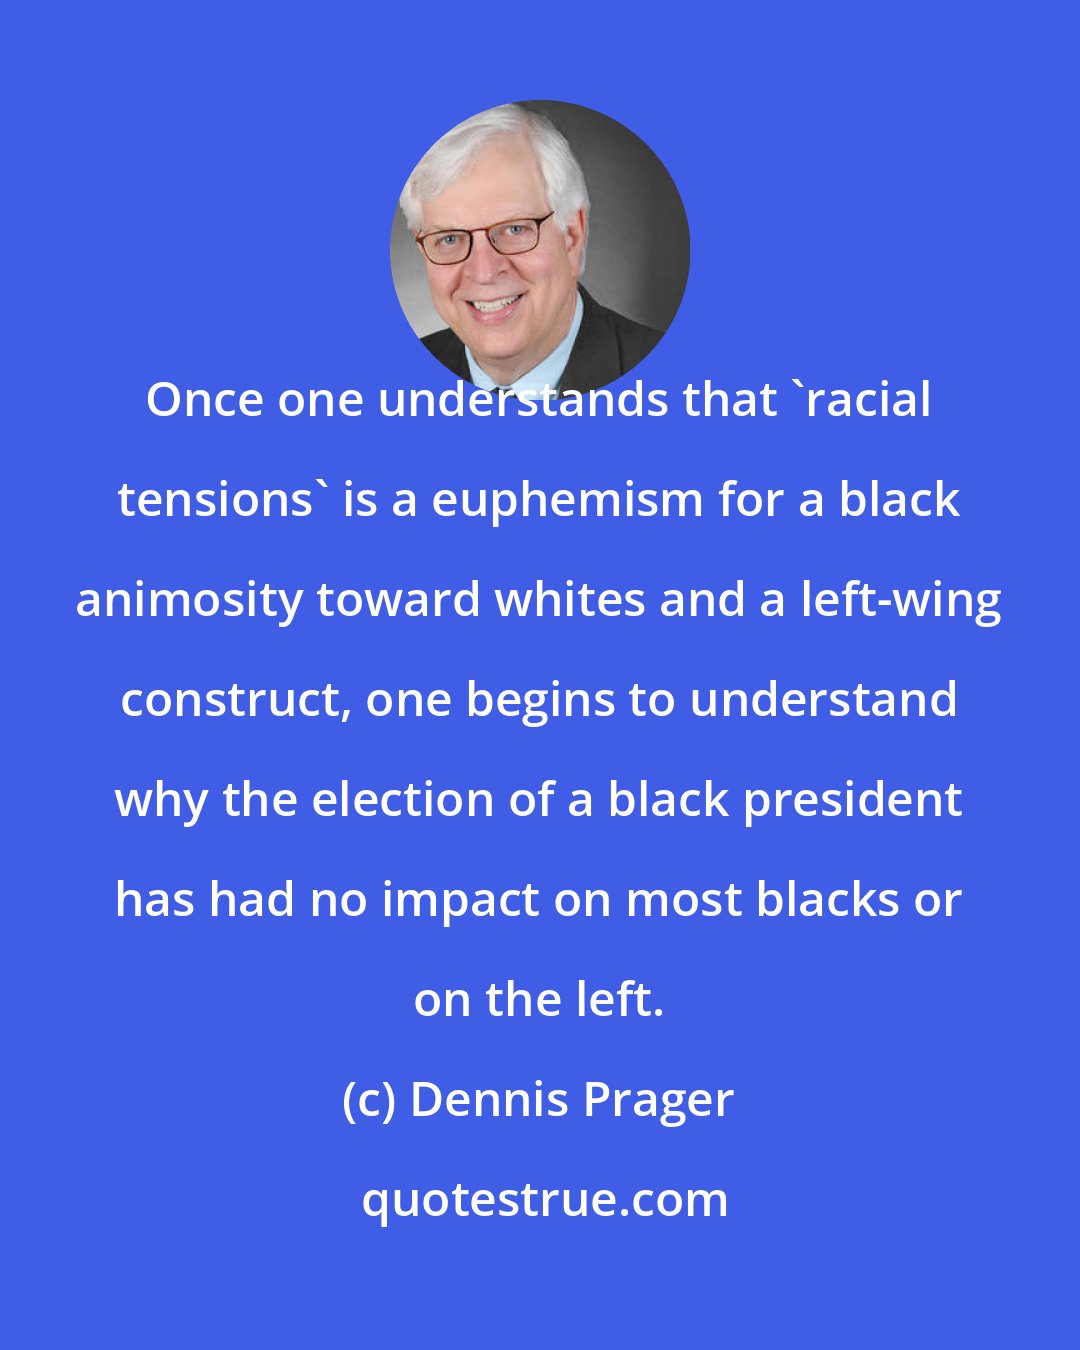 Dennis Prager: Once one understands that 'racial tensions' is a euphemism for a black animosity toward whites and a left-wing construct, one begins to understand why the election of a black president has had no impact on most blacks or on the left.